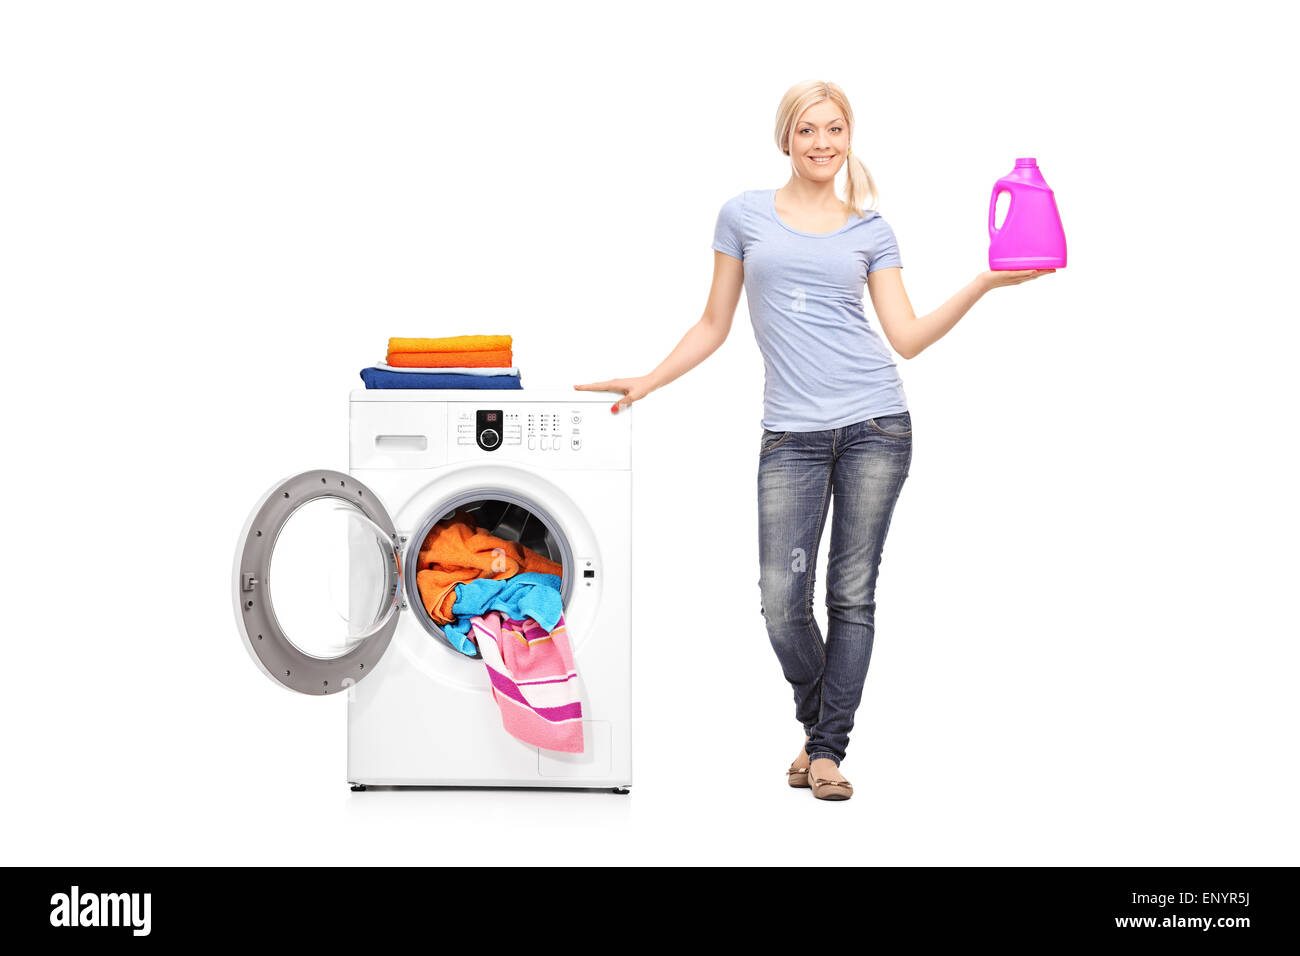 Full length portrait of a young woman holding a washing detergent and posing next to a washing machine Stock Photo